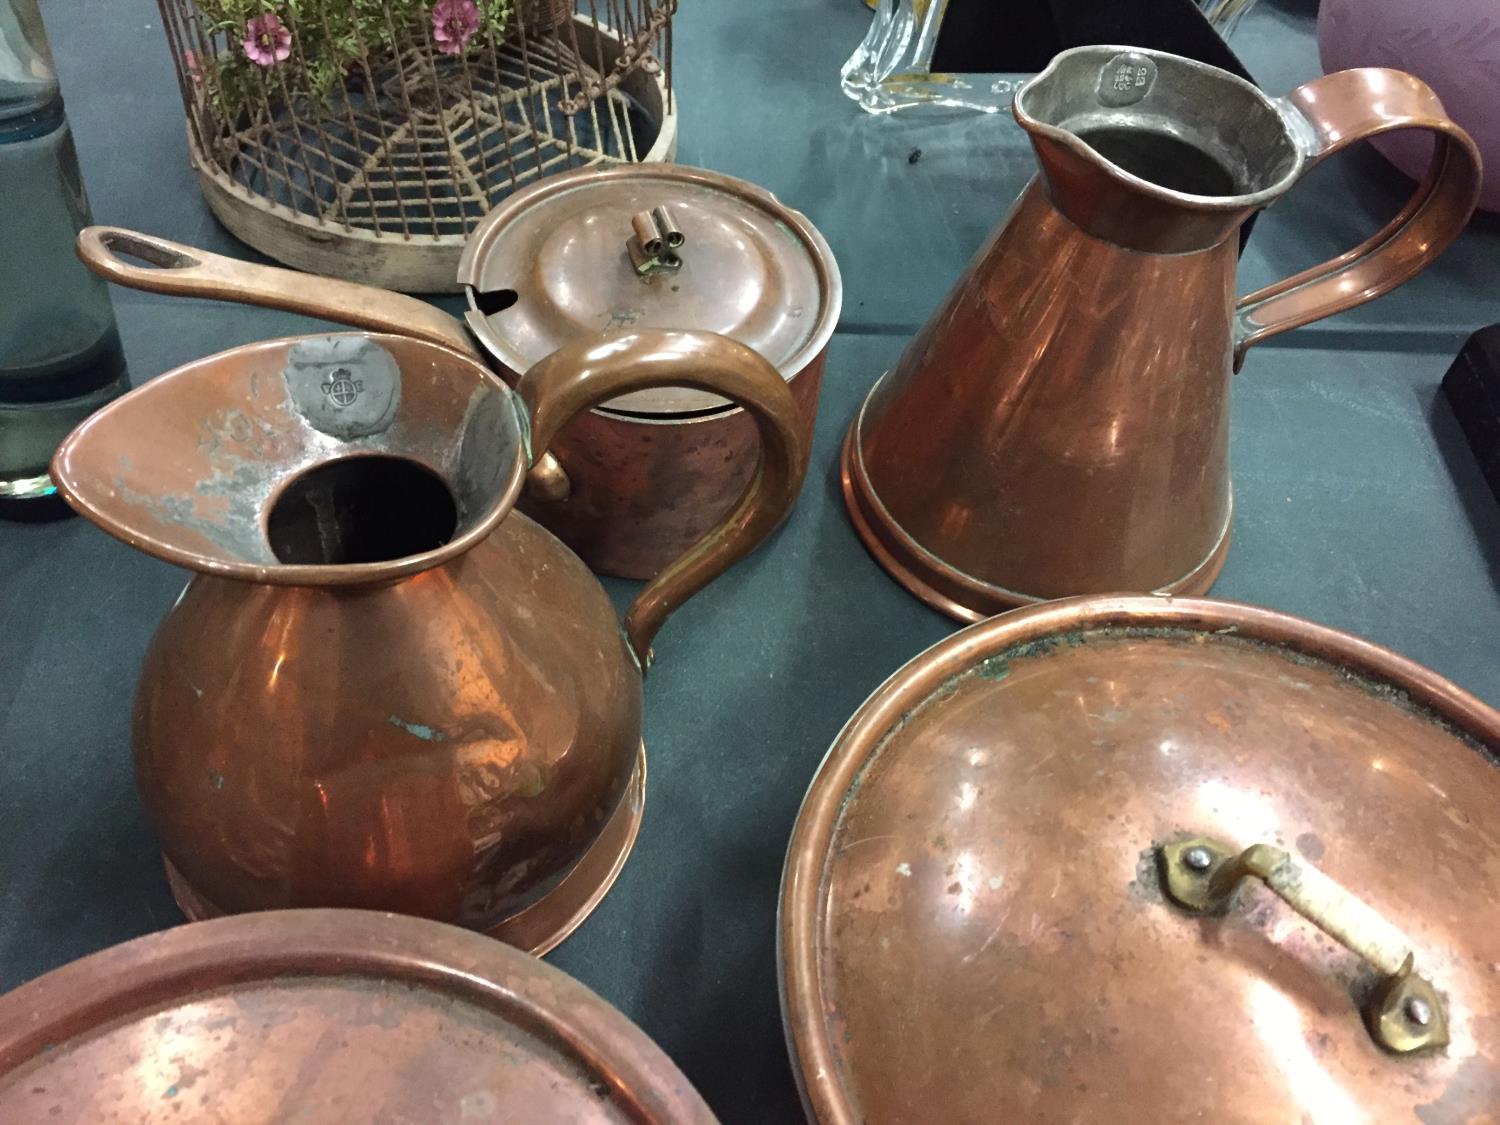 A QUANTITY OF COPPERWARE TO INCLUDE TWO QUART JUGS ONE WITH THE NAME G & J OLIVER LONDON, COPPER - Image 3 of 3